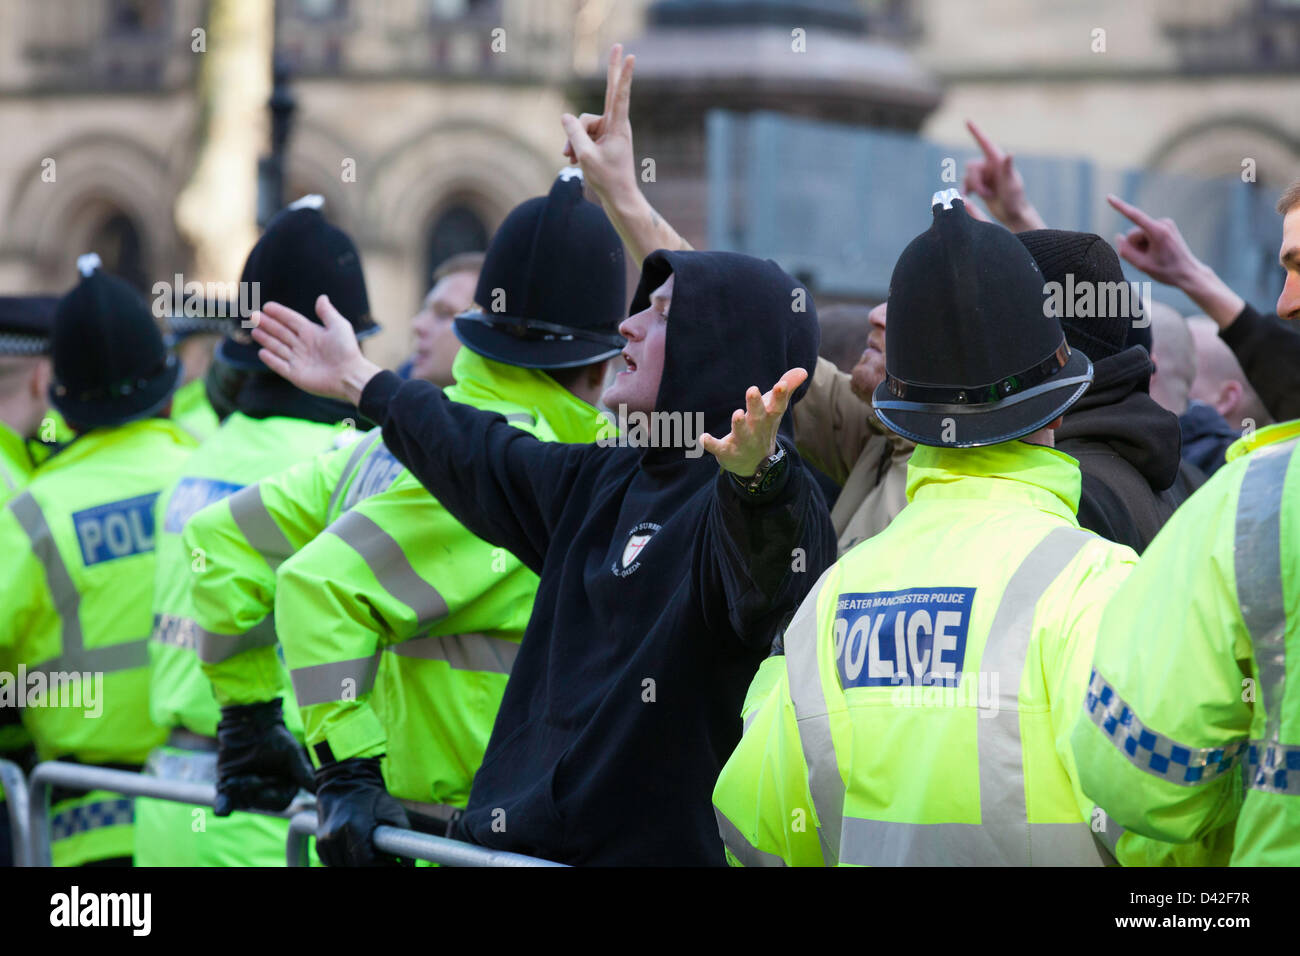 Manchester, UK. 2nd March 2013. Members of the far-right English Defence League (EDL) clash with police during a protest in Manchester. Approximately 300 members of the 'Islamophobic' group attended. EDL members chanting slogans to reporters and people that were gathered at the side of the square overlooking their arrival. Credit: Lydia Pagoni/Alamy Live News Stock Photo